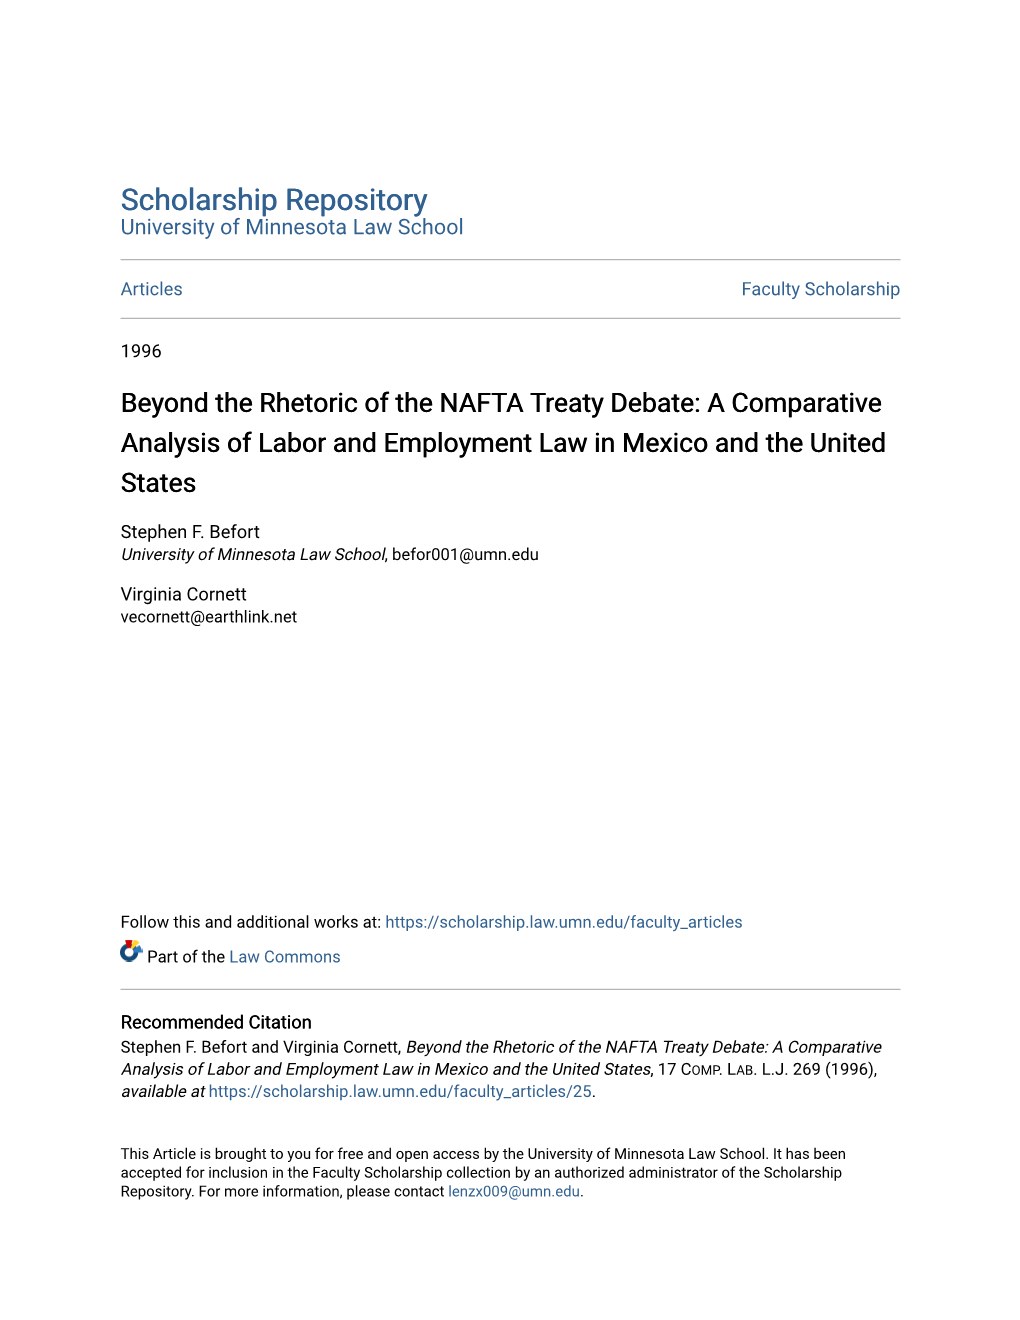 A Comparative Analysis of Labor and Employment Law in Mexico and the United States